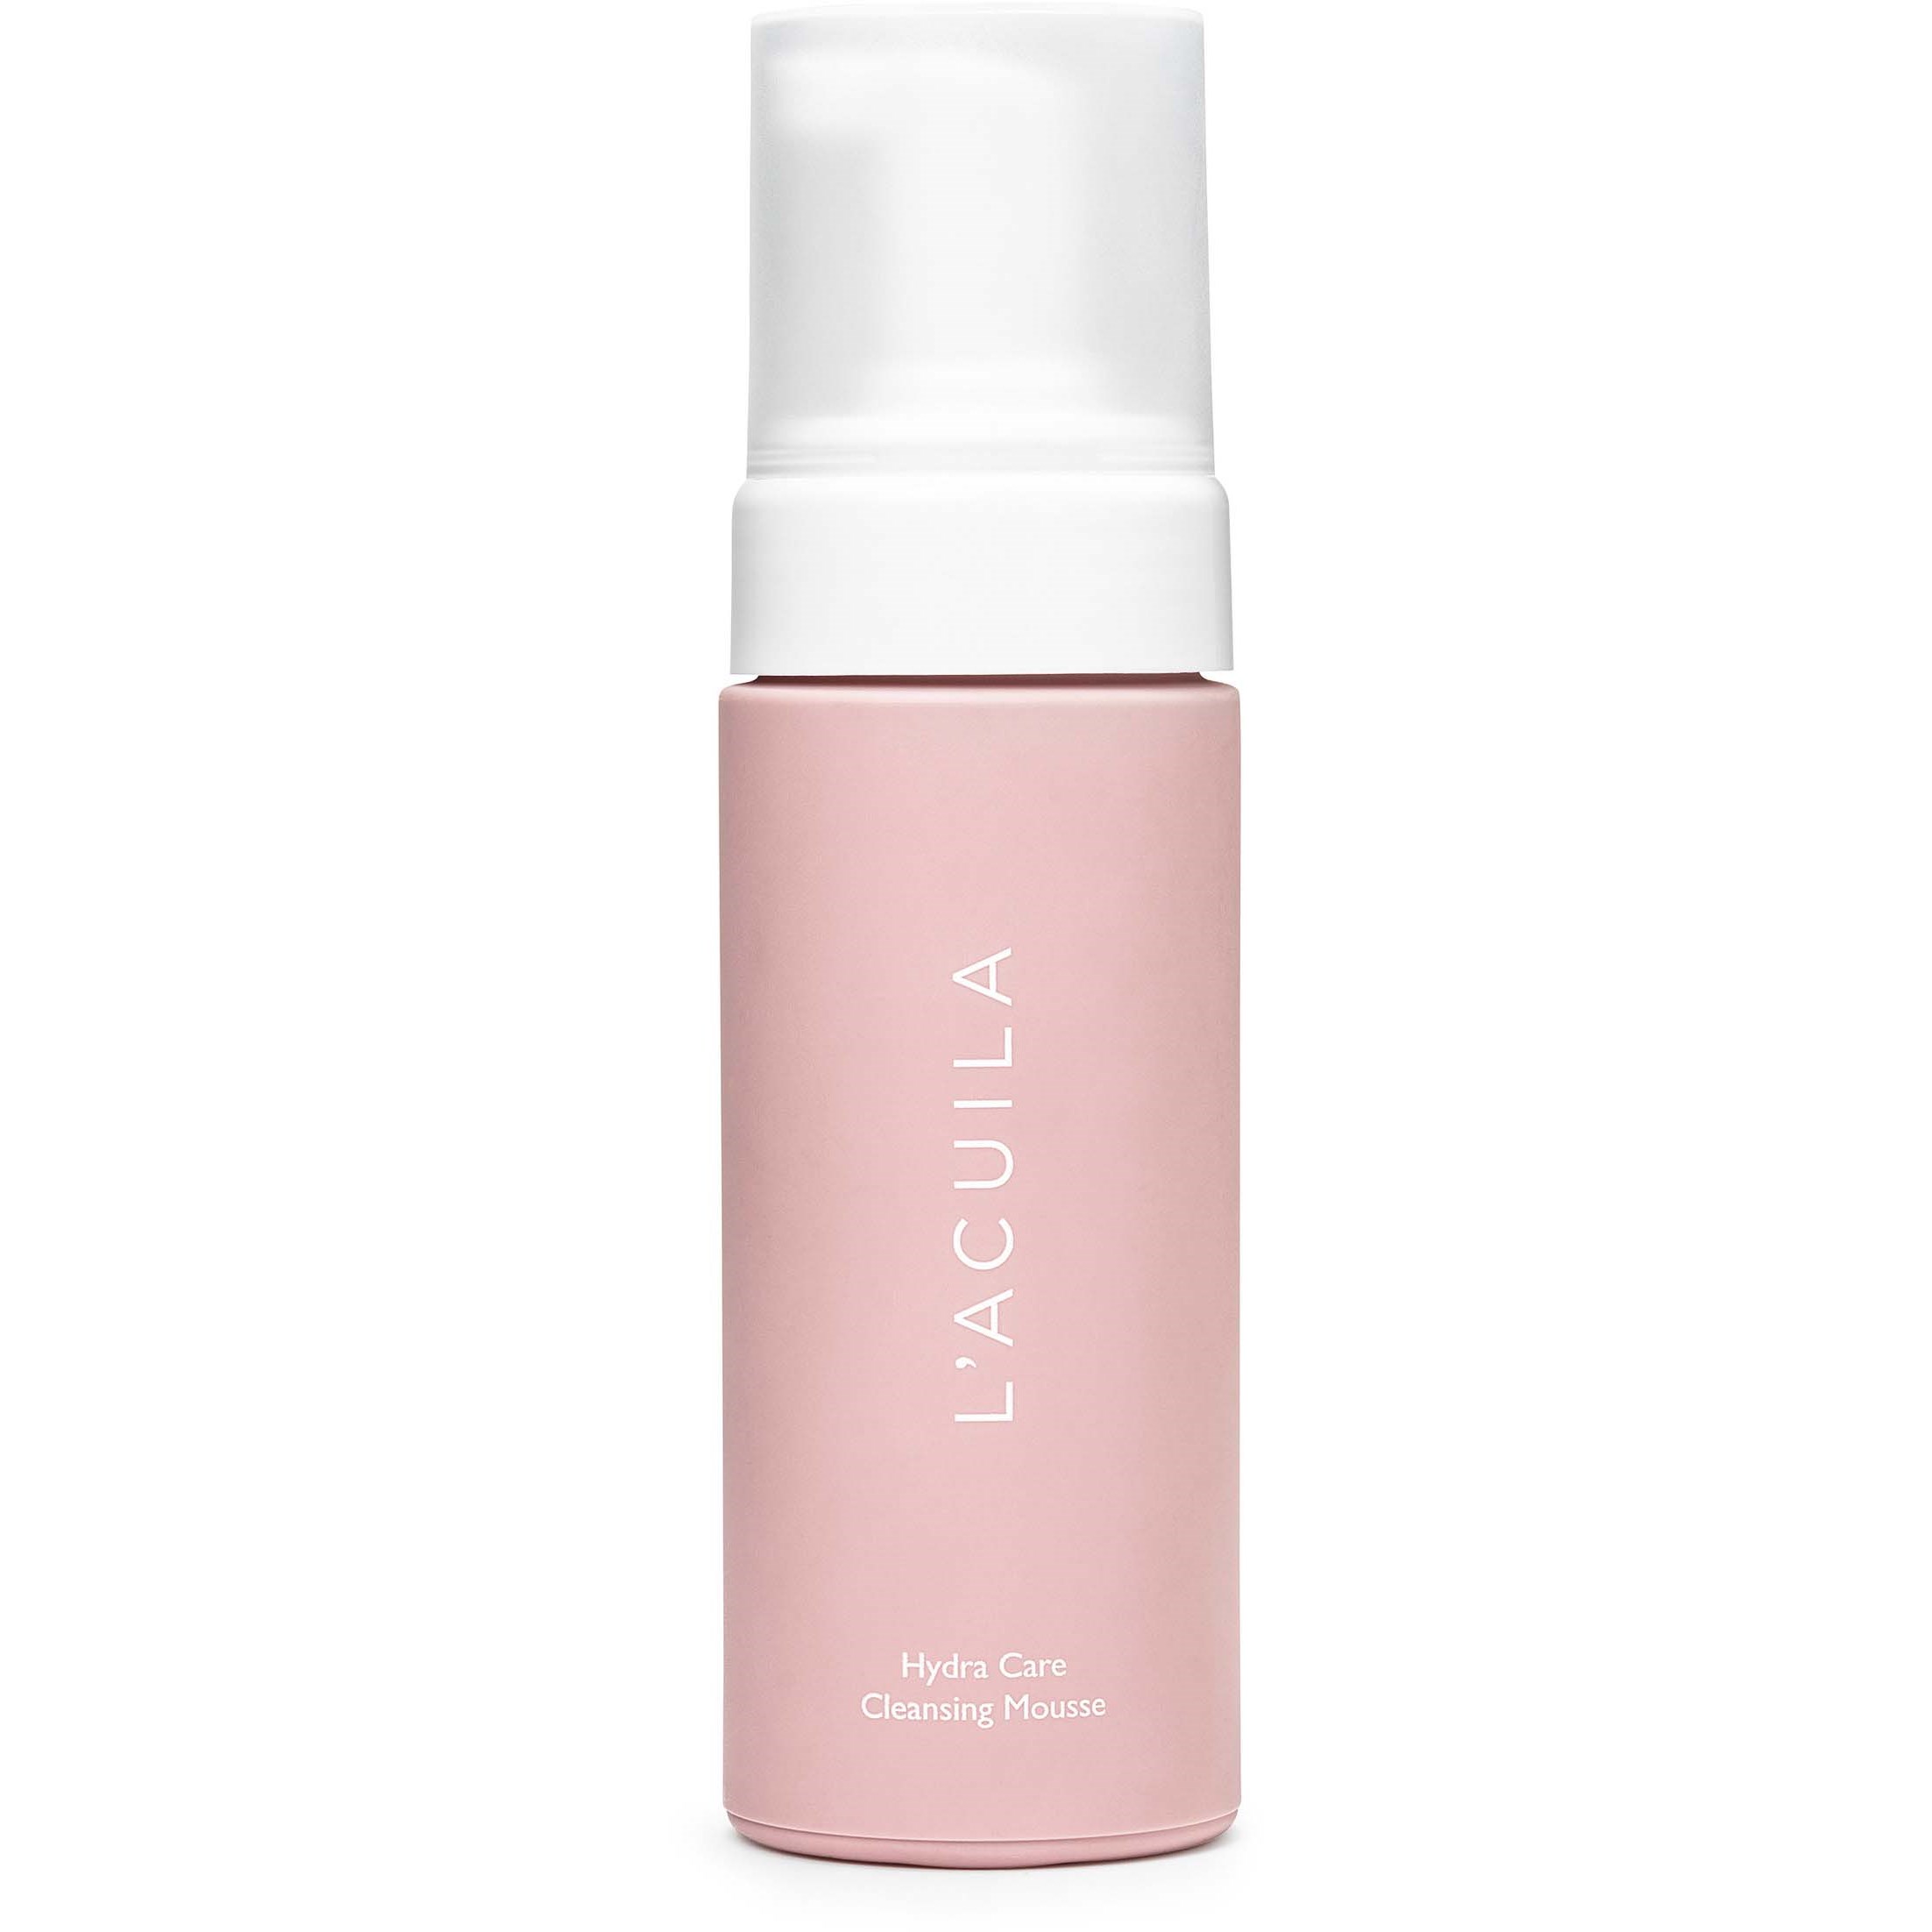 Läs mer om LAcuila Hydra Care Cleansing Mousse 150 ml